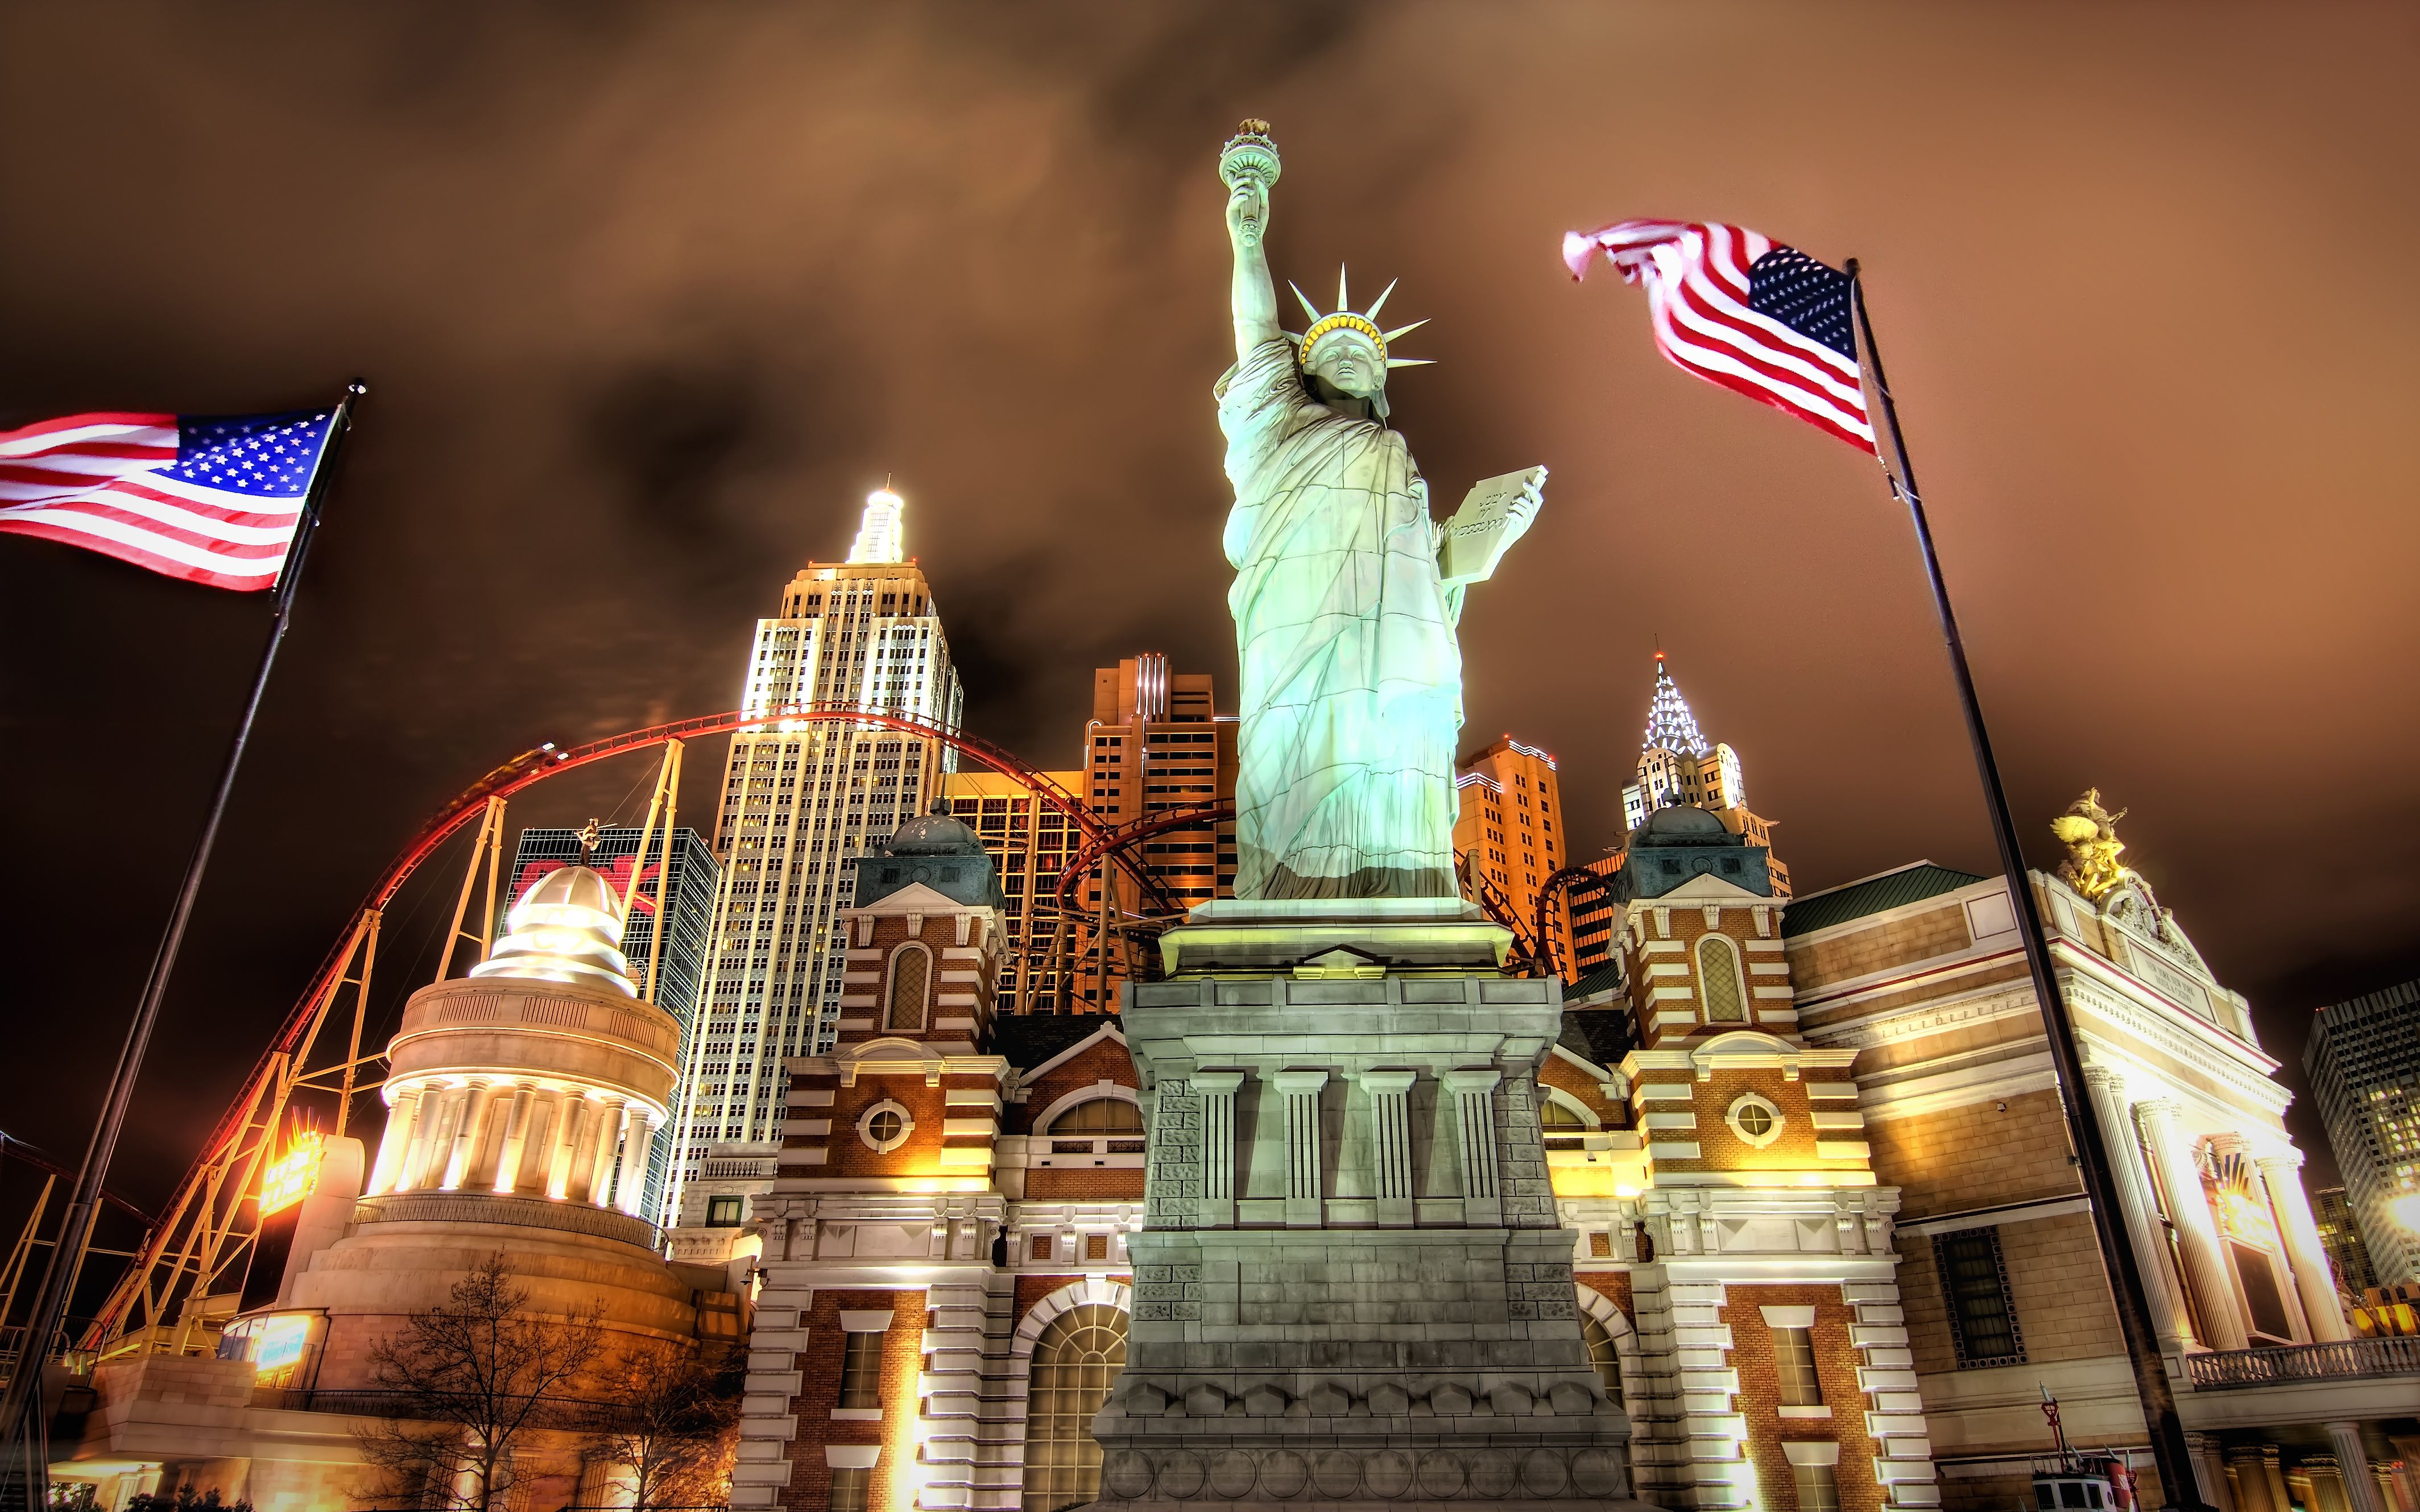 A Copy Of Njuork And Statue Of Liberty In Las Vegas.nevada Desktop HD Wallpaper For Mobile Phones Pc And Tablet 4255x2659, Wallpaper13.com